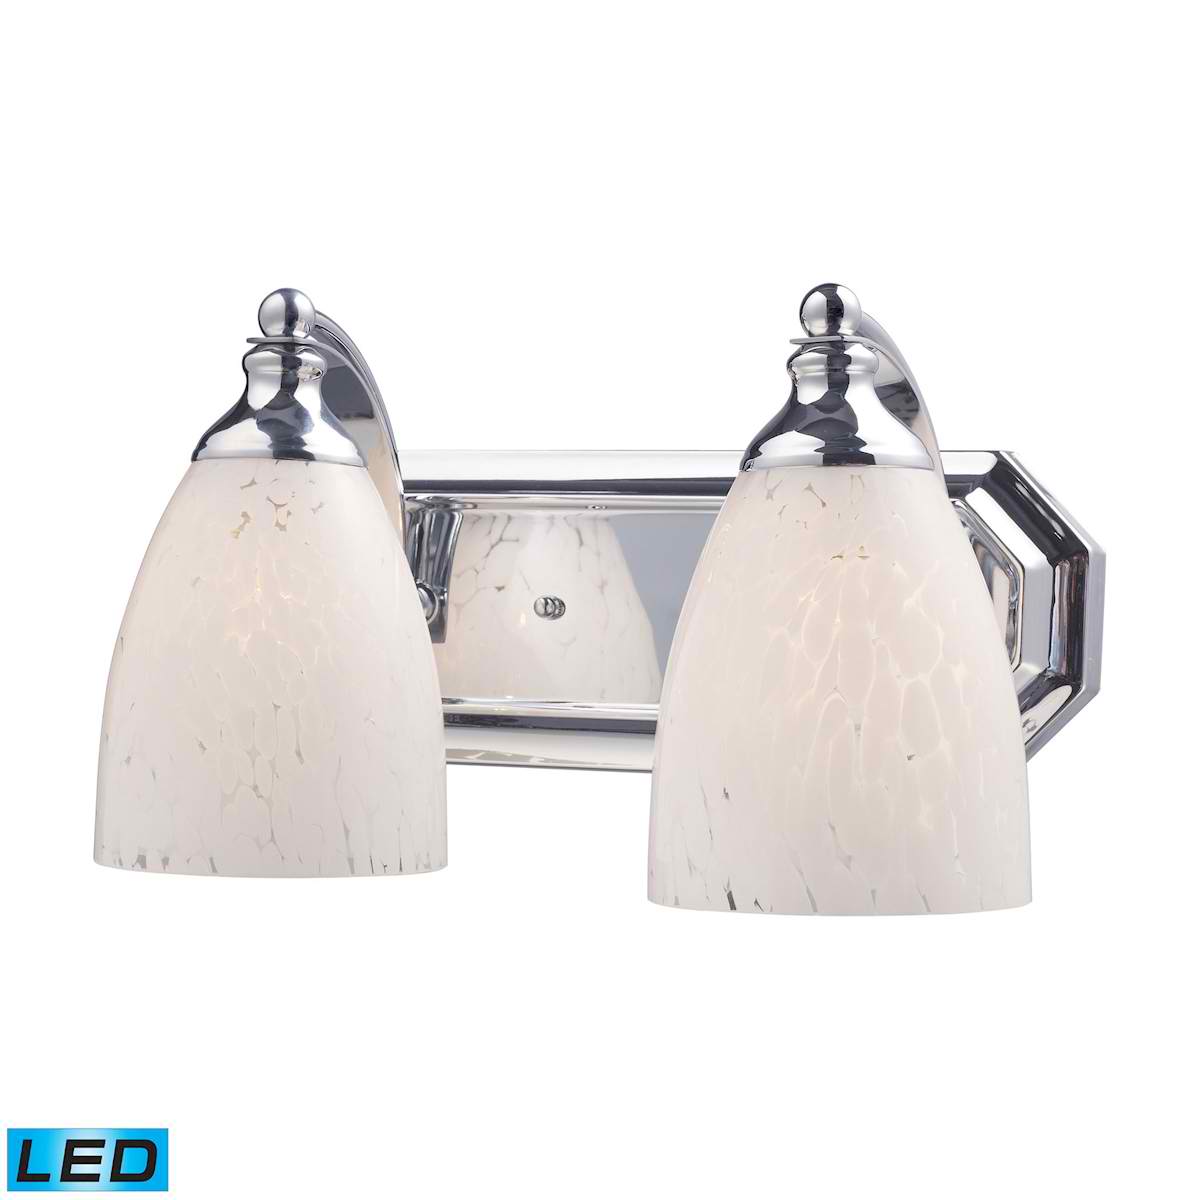 2 Light Vanity in Polished Chrome and Snow White Glass - LED, 800 Lumens (1600 Lumens Total) with Full Scale